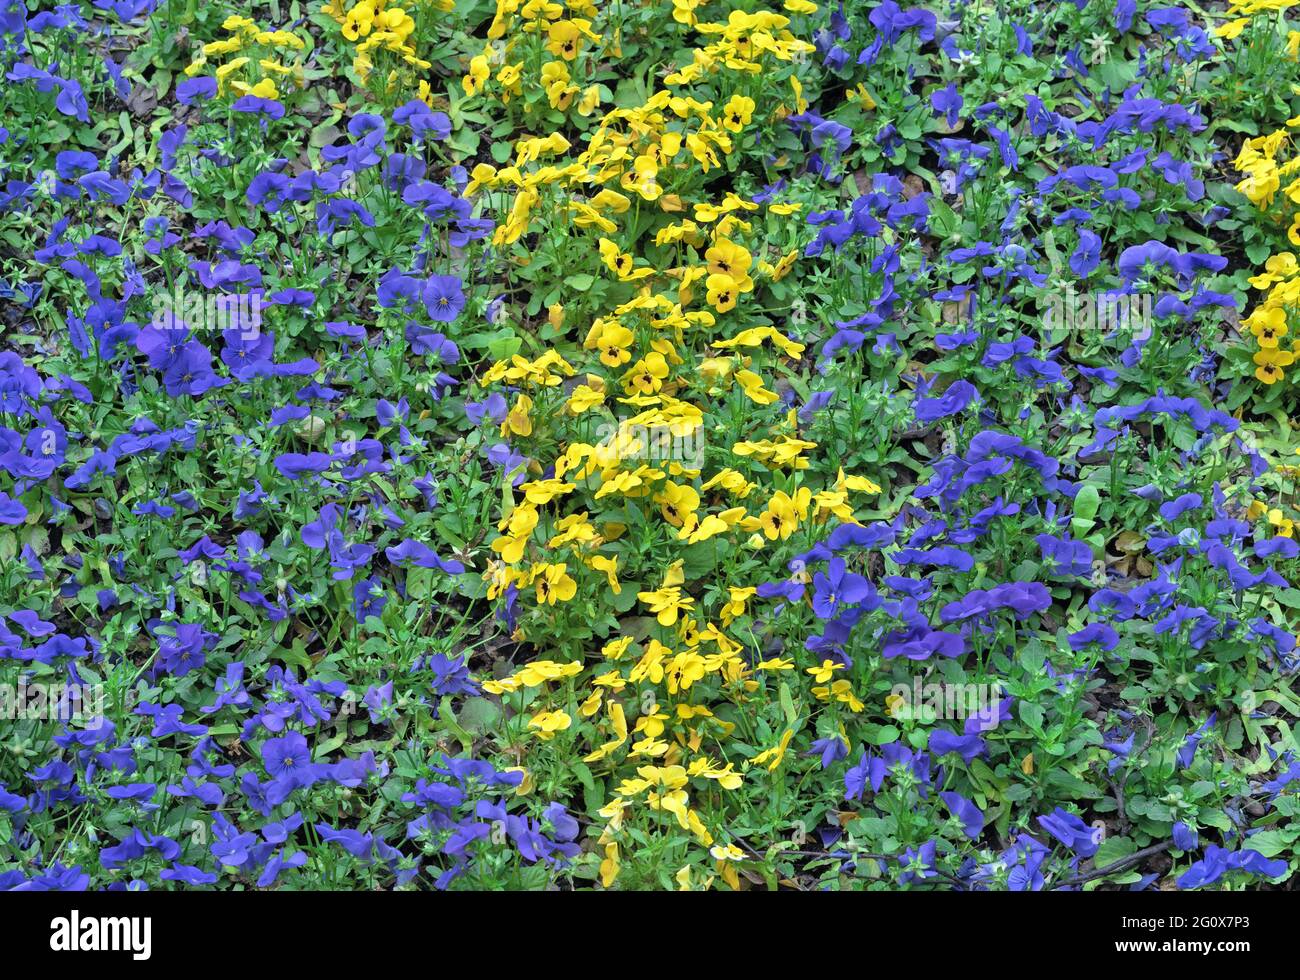 Violet-yellow pansies bloom on a flower bed in a summer garden. Stock Photo